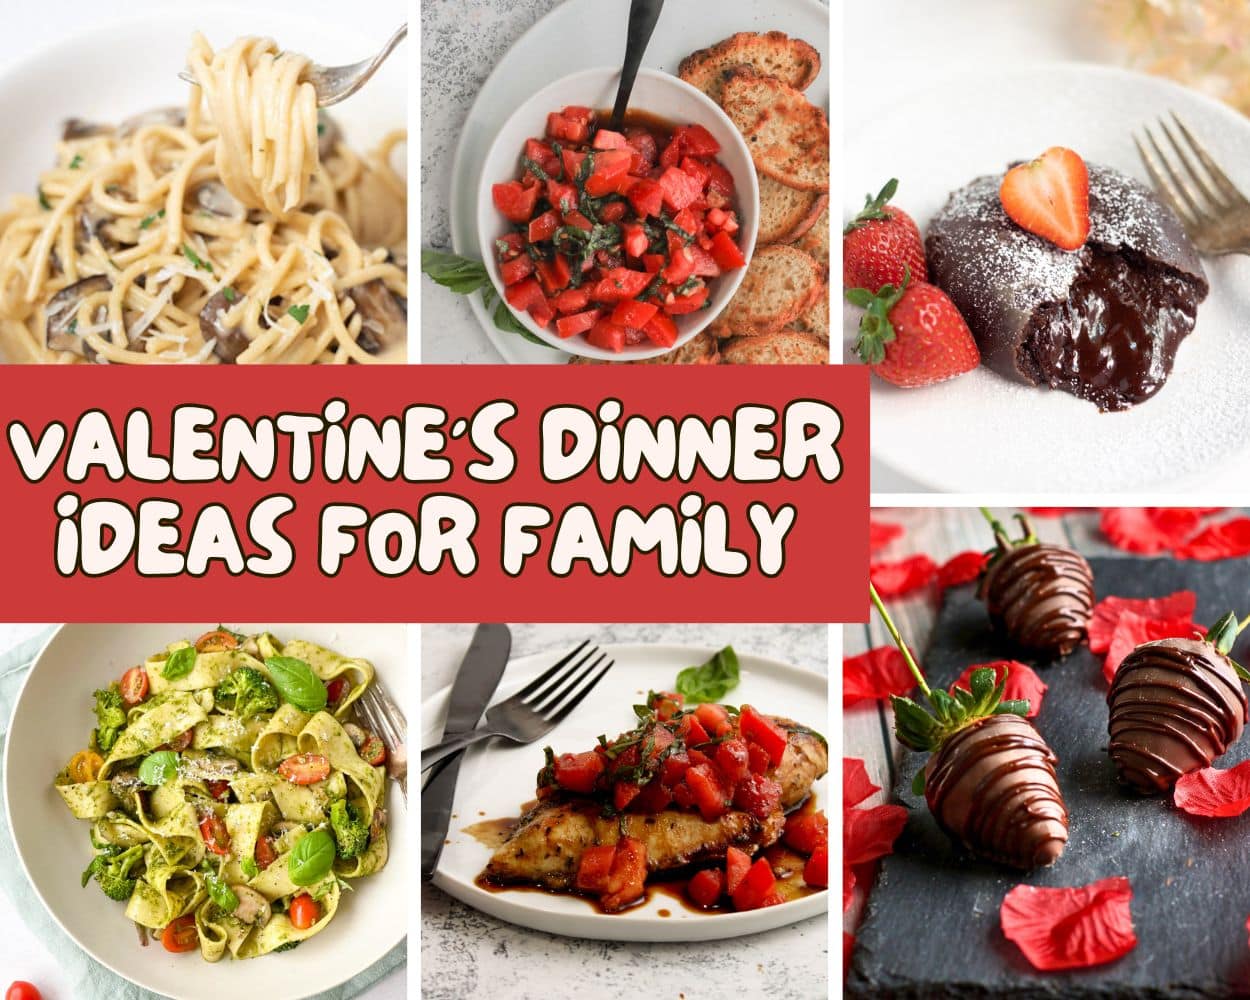 Valentines dinner ideas for family collage